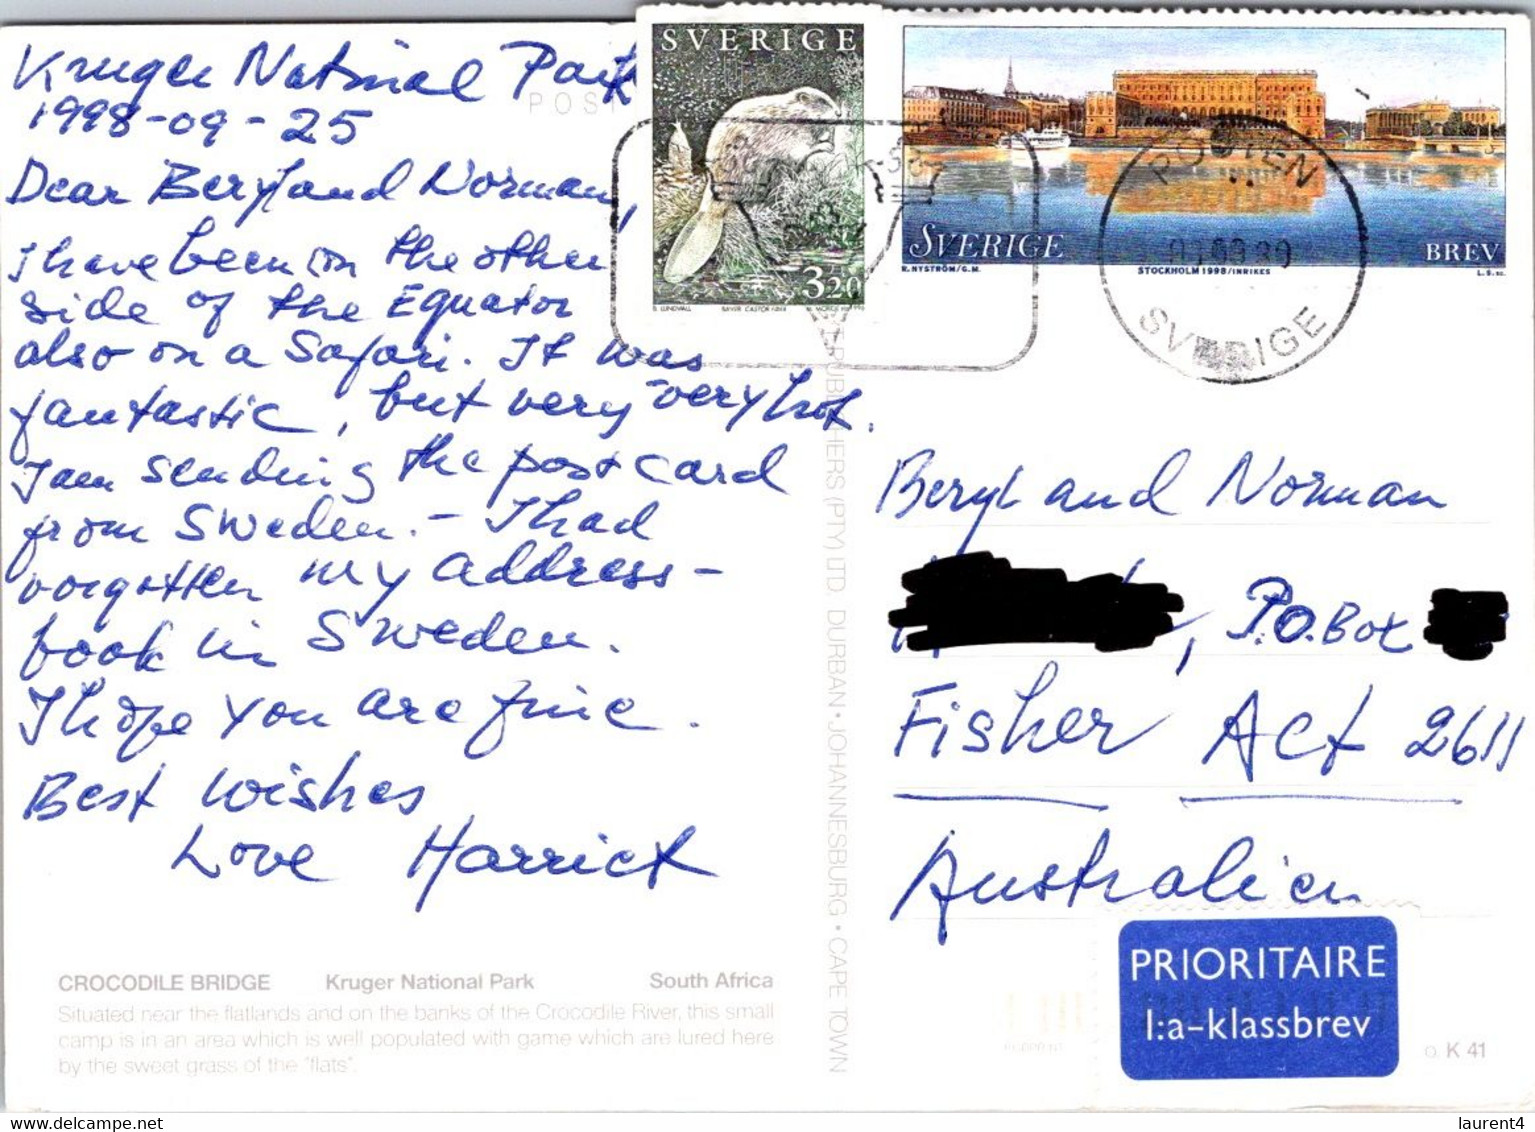 (2 A 14) South Africa Postcard Posted To Australia (with Sweden Stamps) CROCODILE Bridge (with Rhinoceros) & Map - Rhinoceros